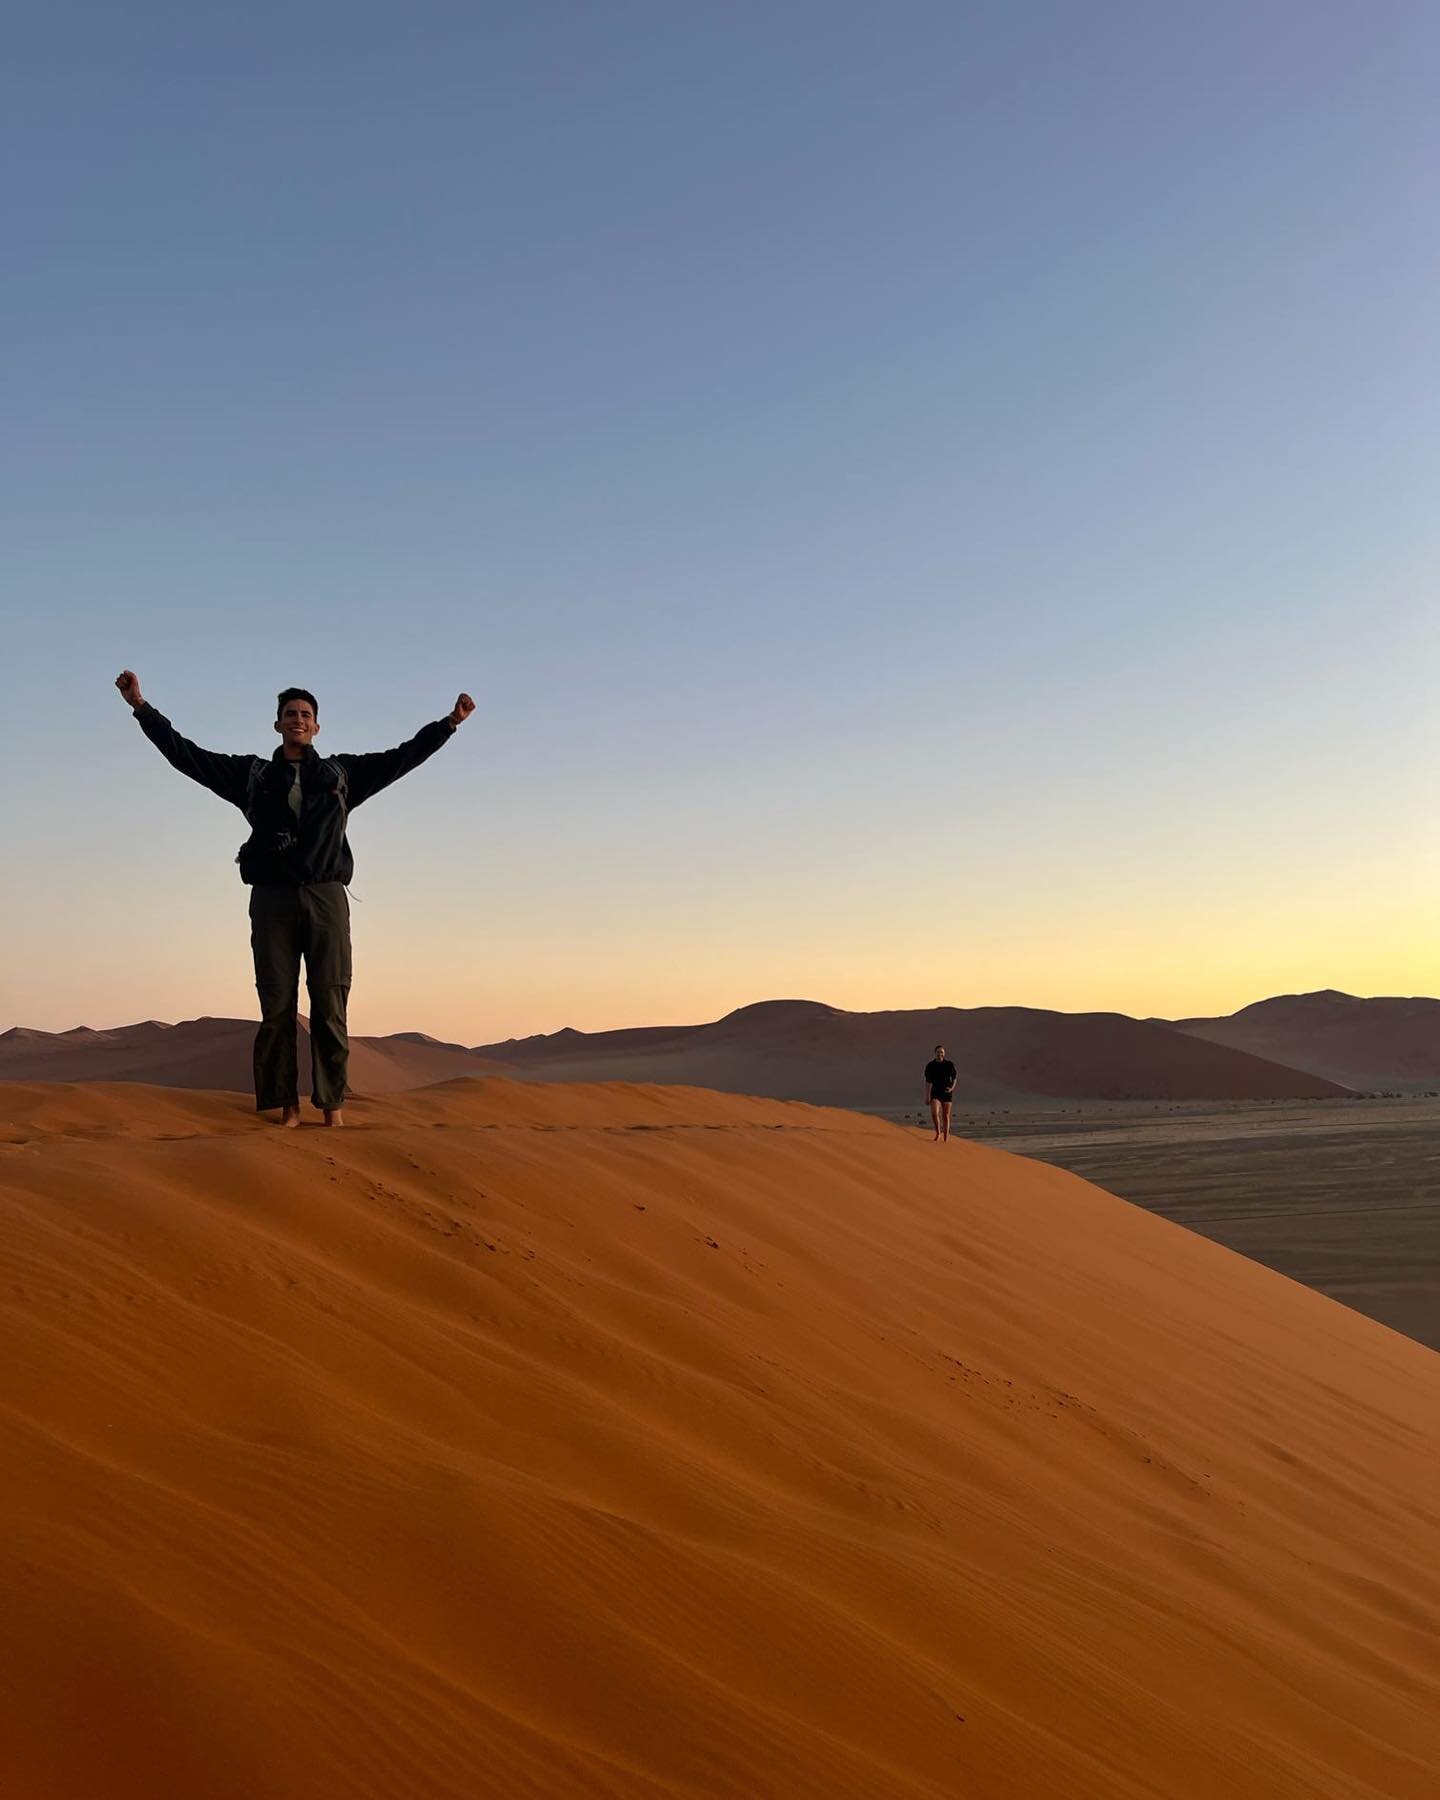 Namibia 🏜️ (1/2)

With 5 days left in this glorious country, I&rsquo;ve realized that I&rsquo;m going to have too much content for a single post. As such, here are some highlights from our expedition up the Skeleton Coast to Swakopmund:

&bull; Sunr